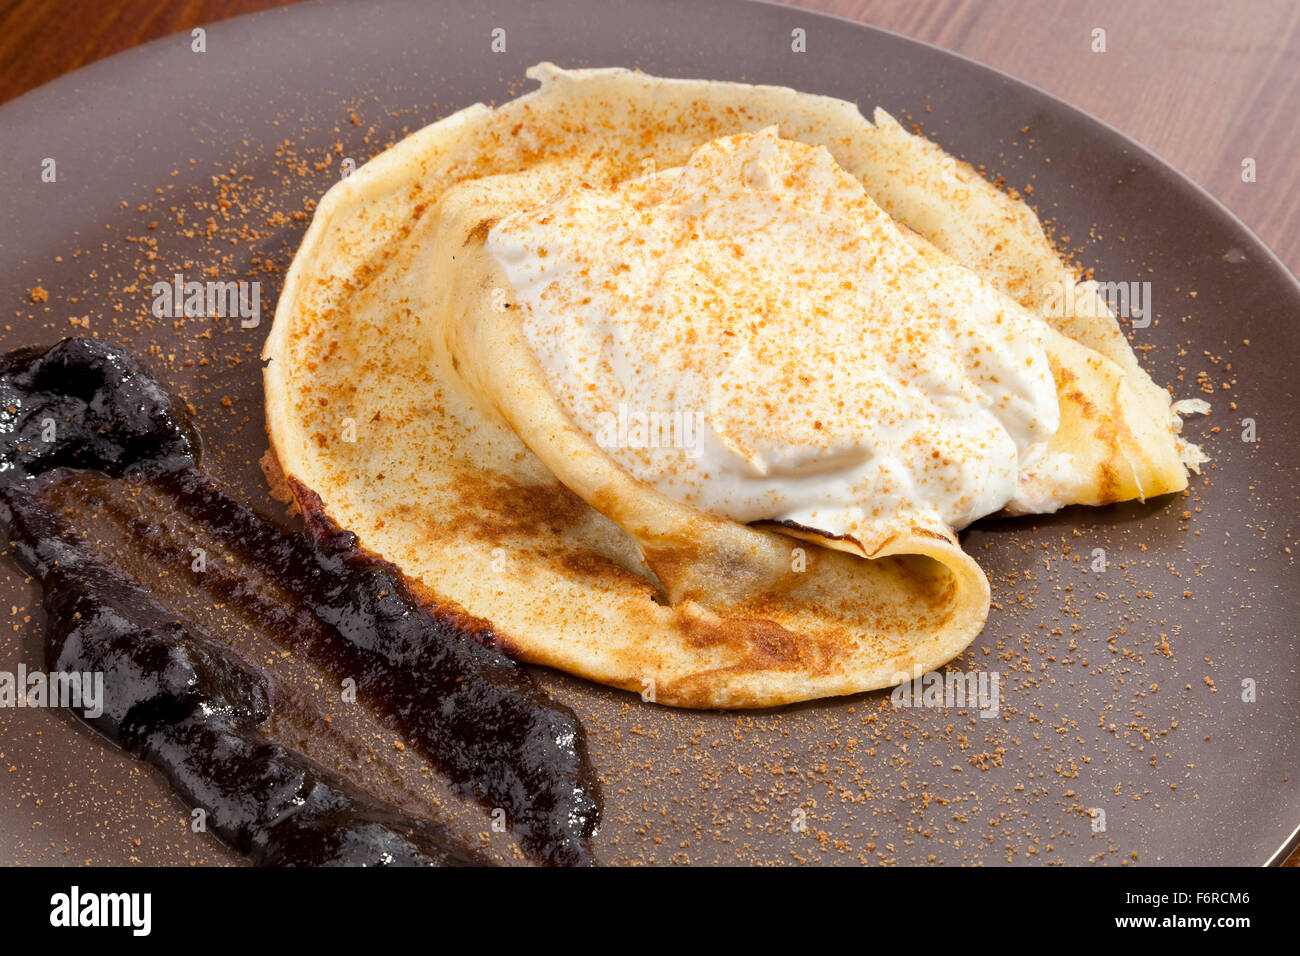 Crepe pancake with whipped cram and gingerbread powder Stock Photo